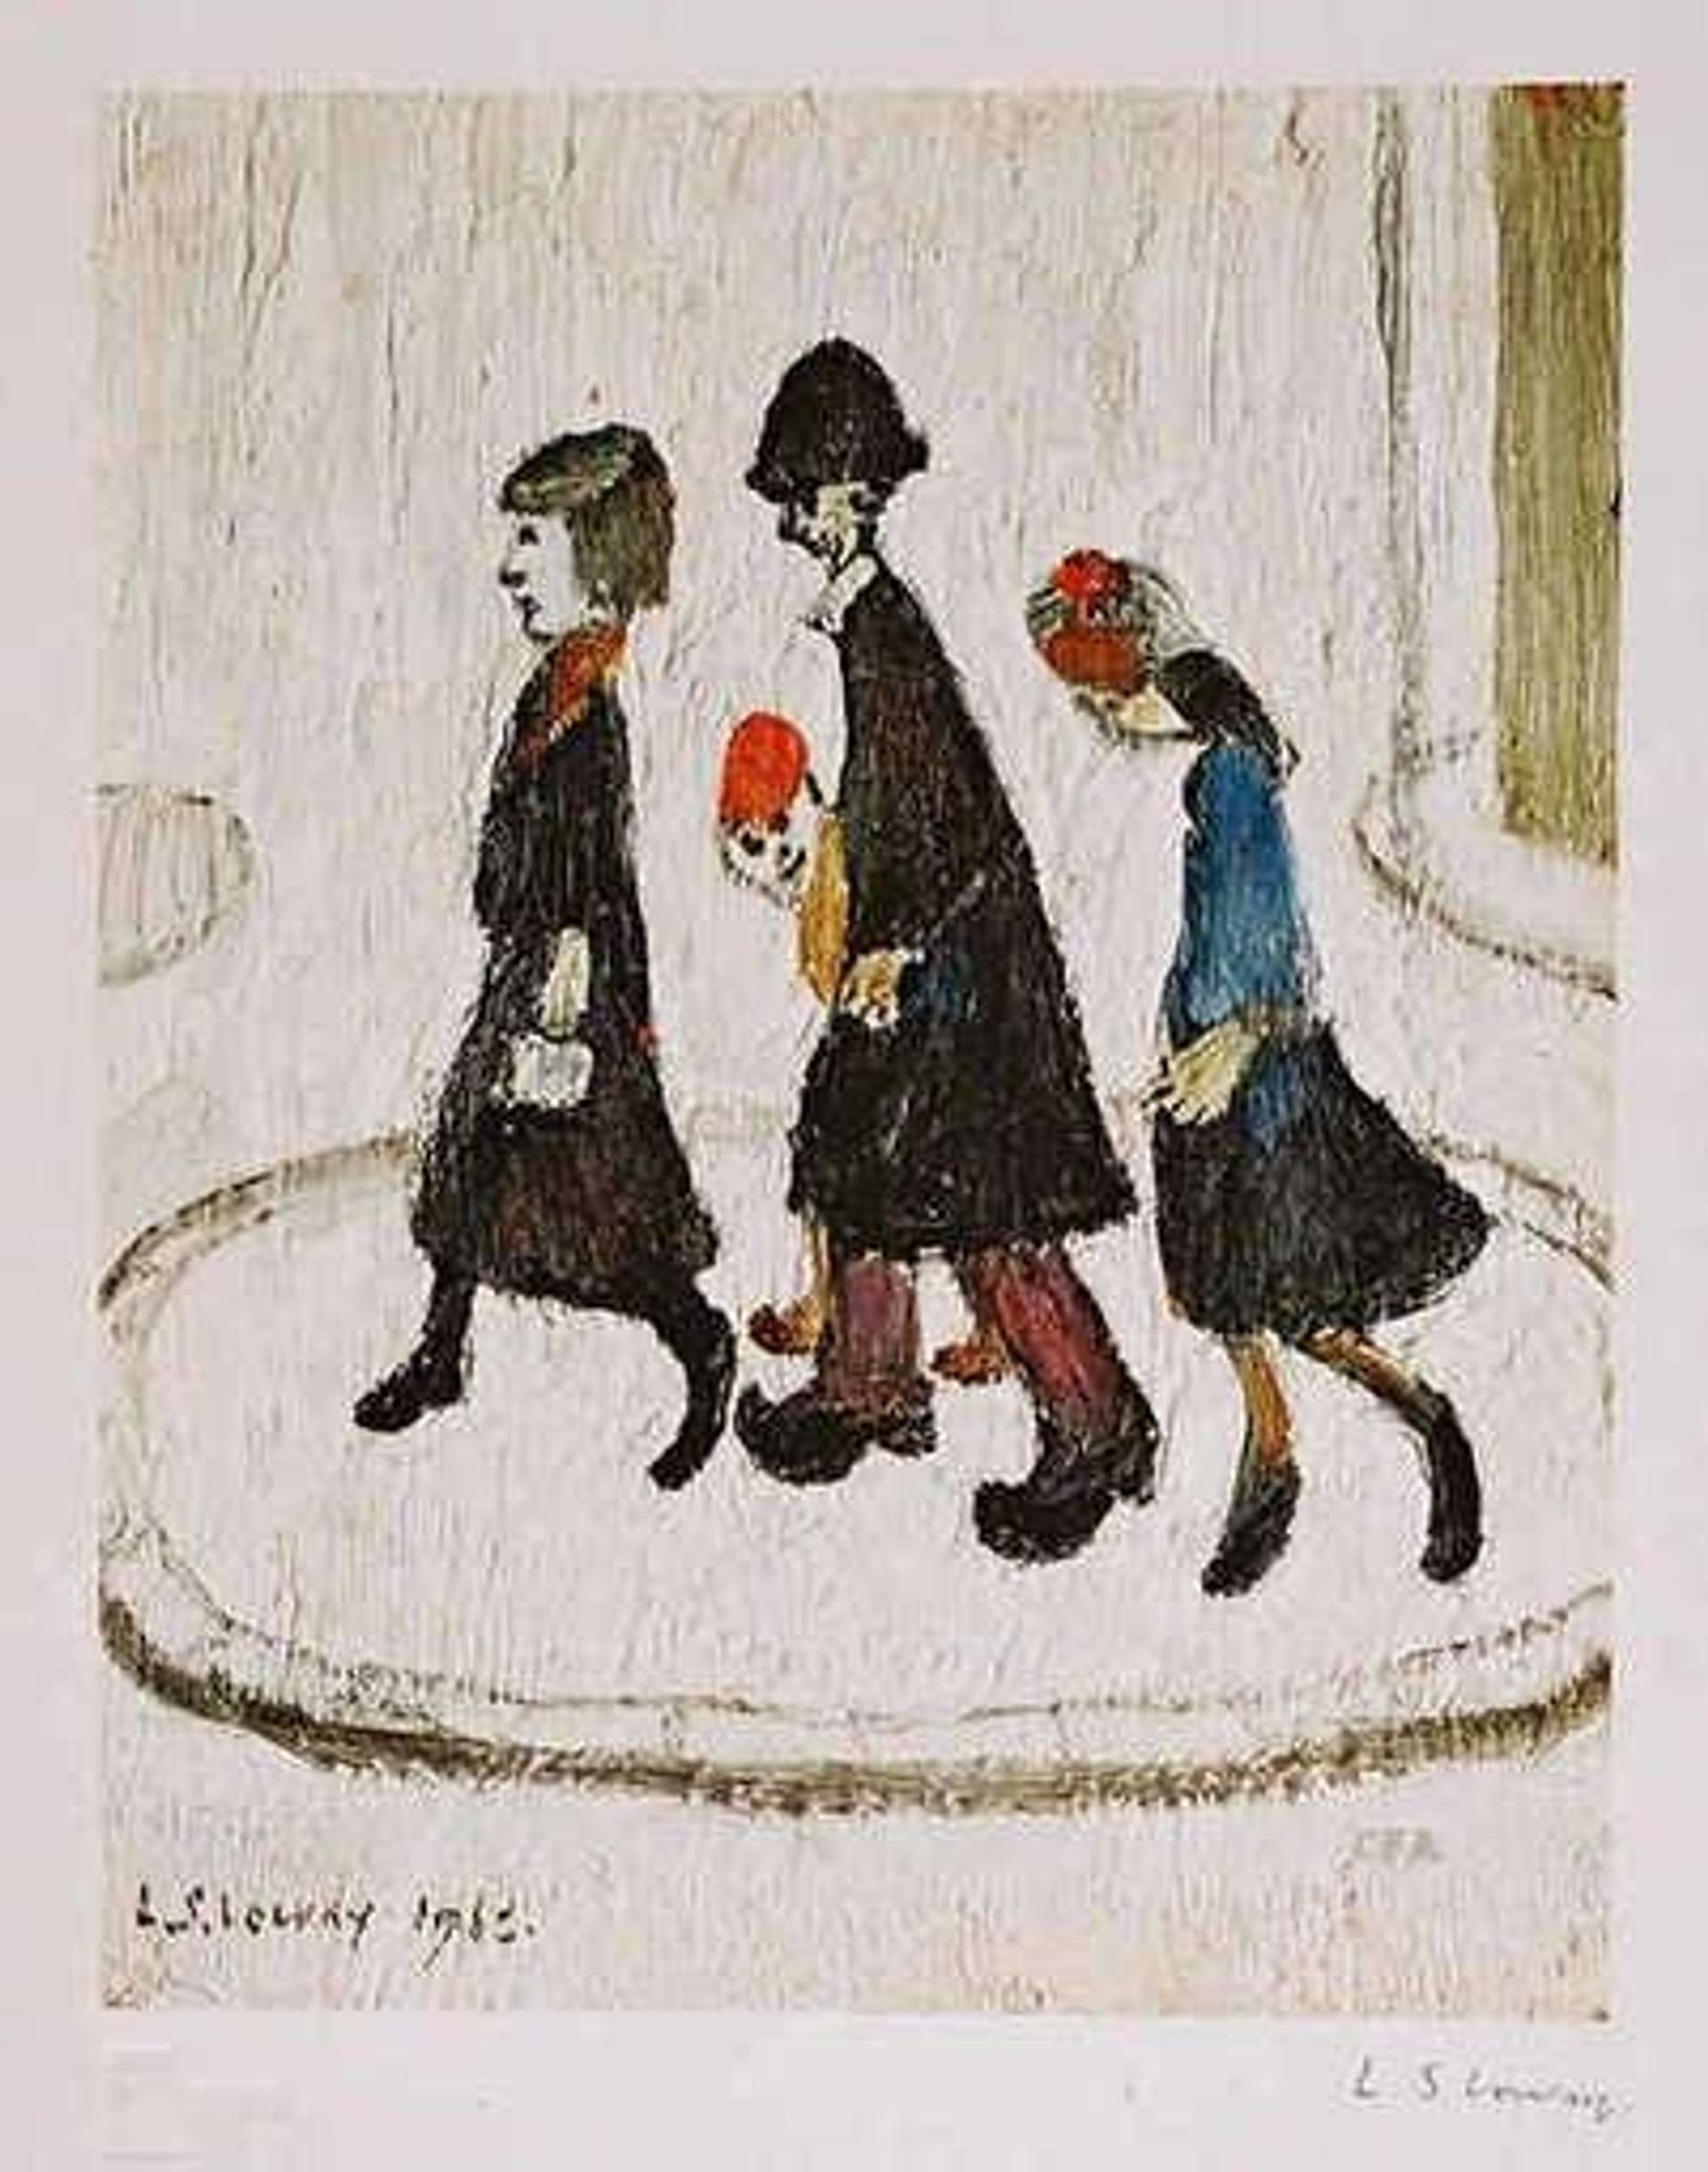 The Family - Signed Print by L. S. Lowry 1970 - MyArtBroker